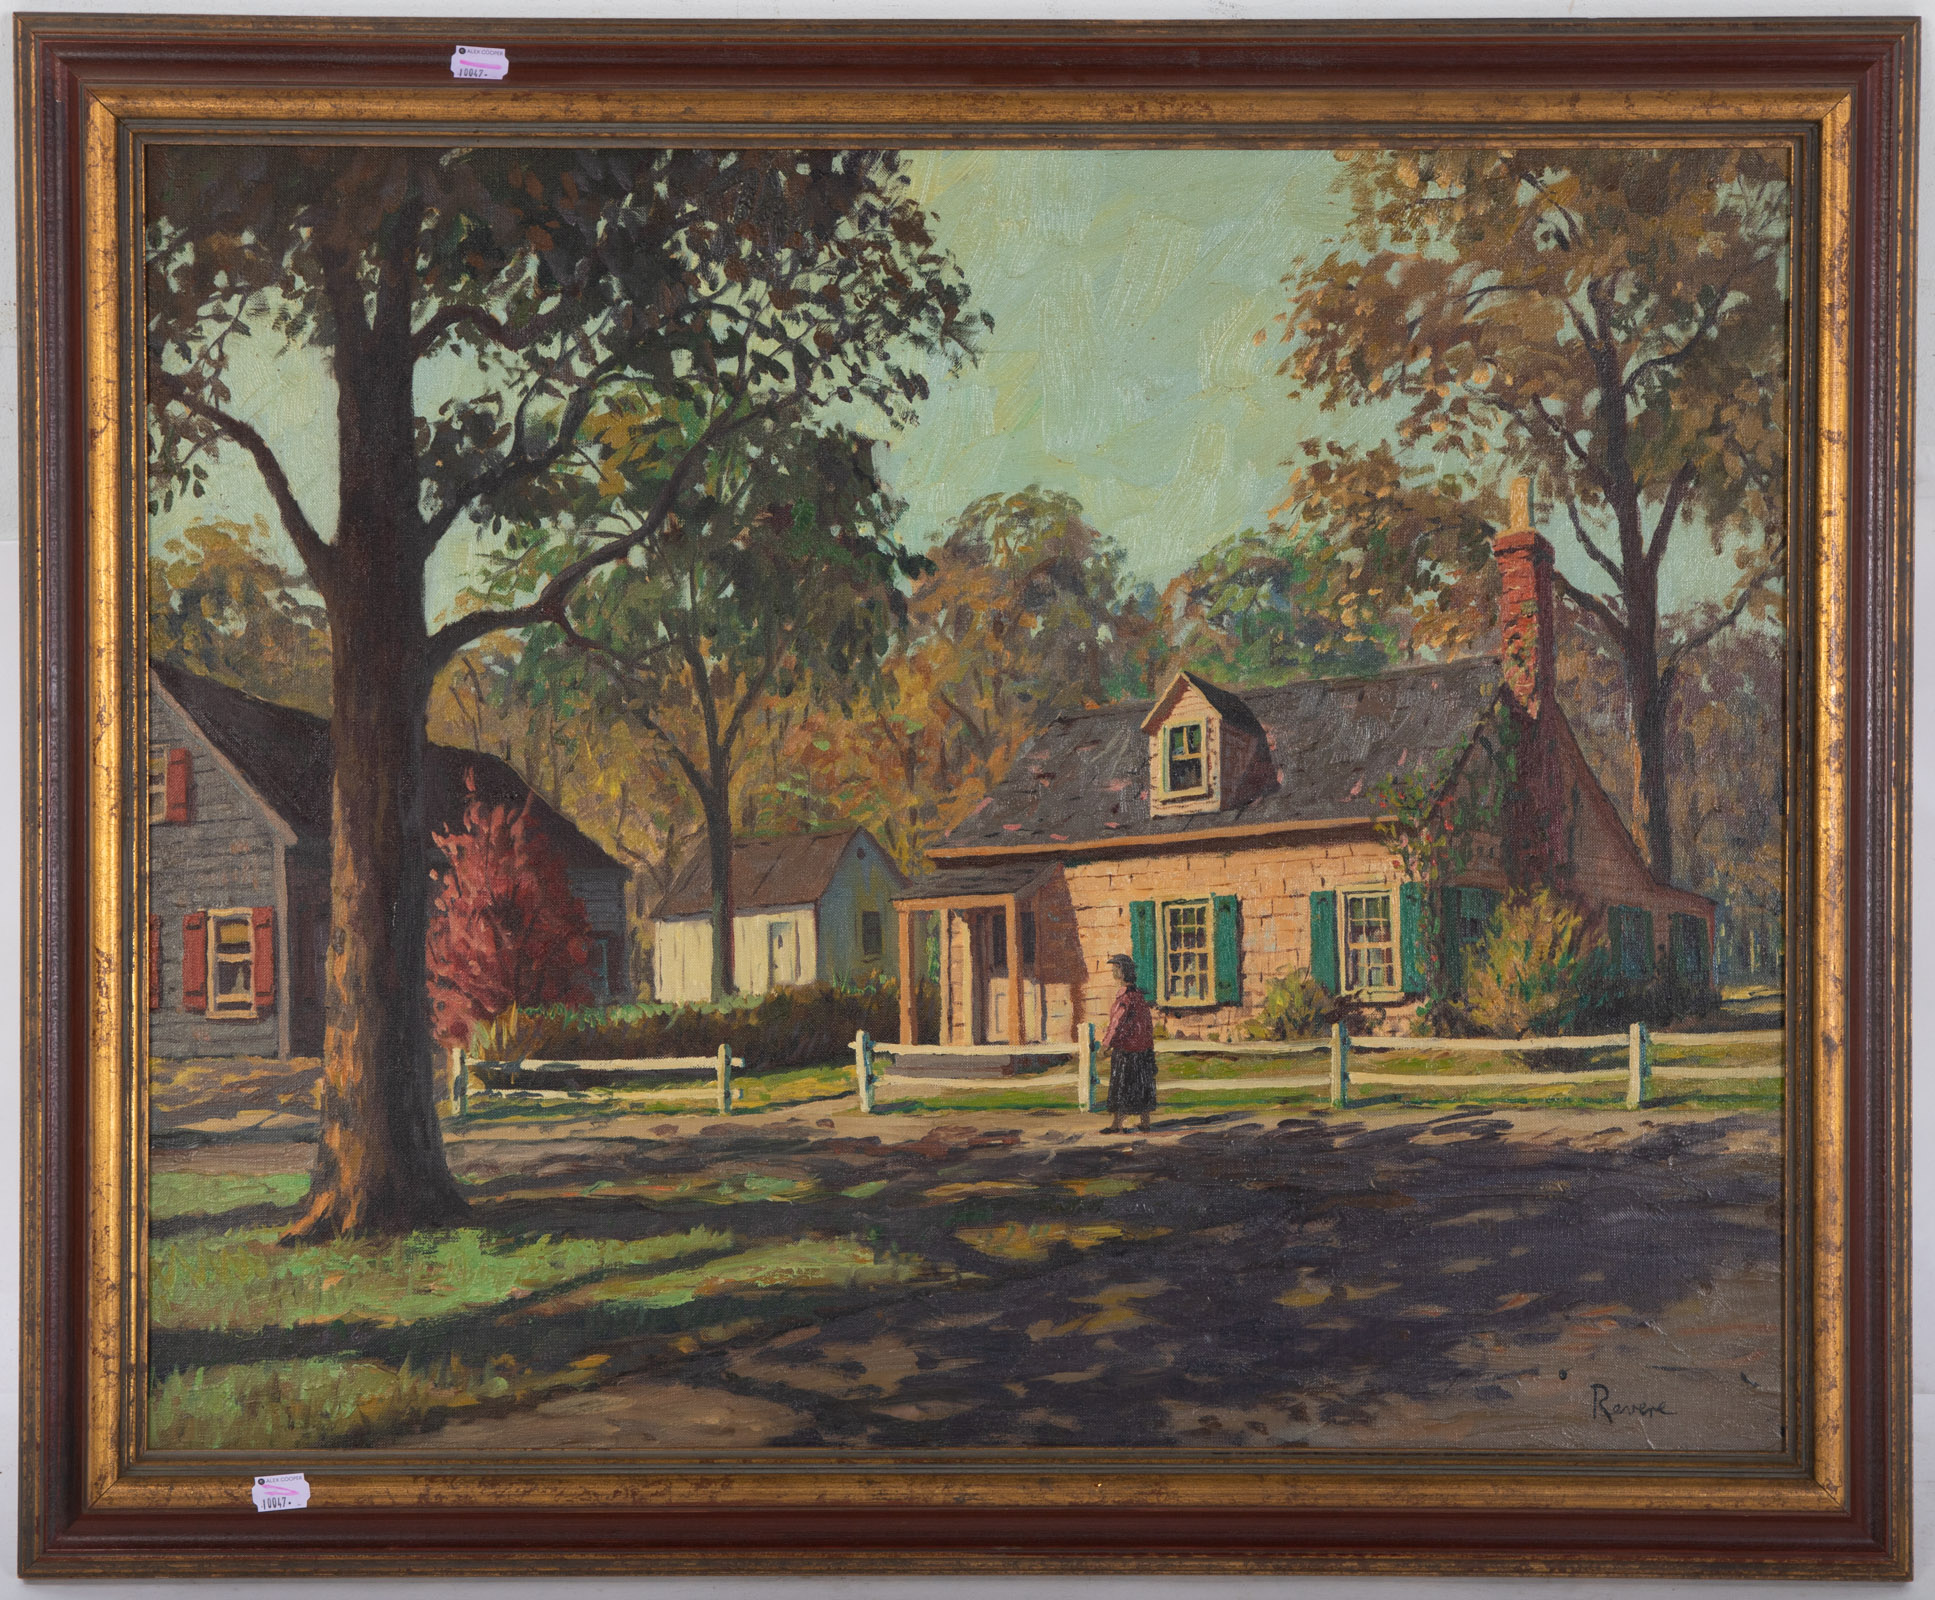 REVERE. COTTAGE HOME IN RURAL SETTING,